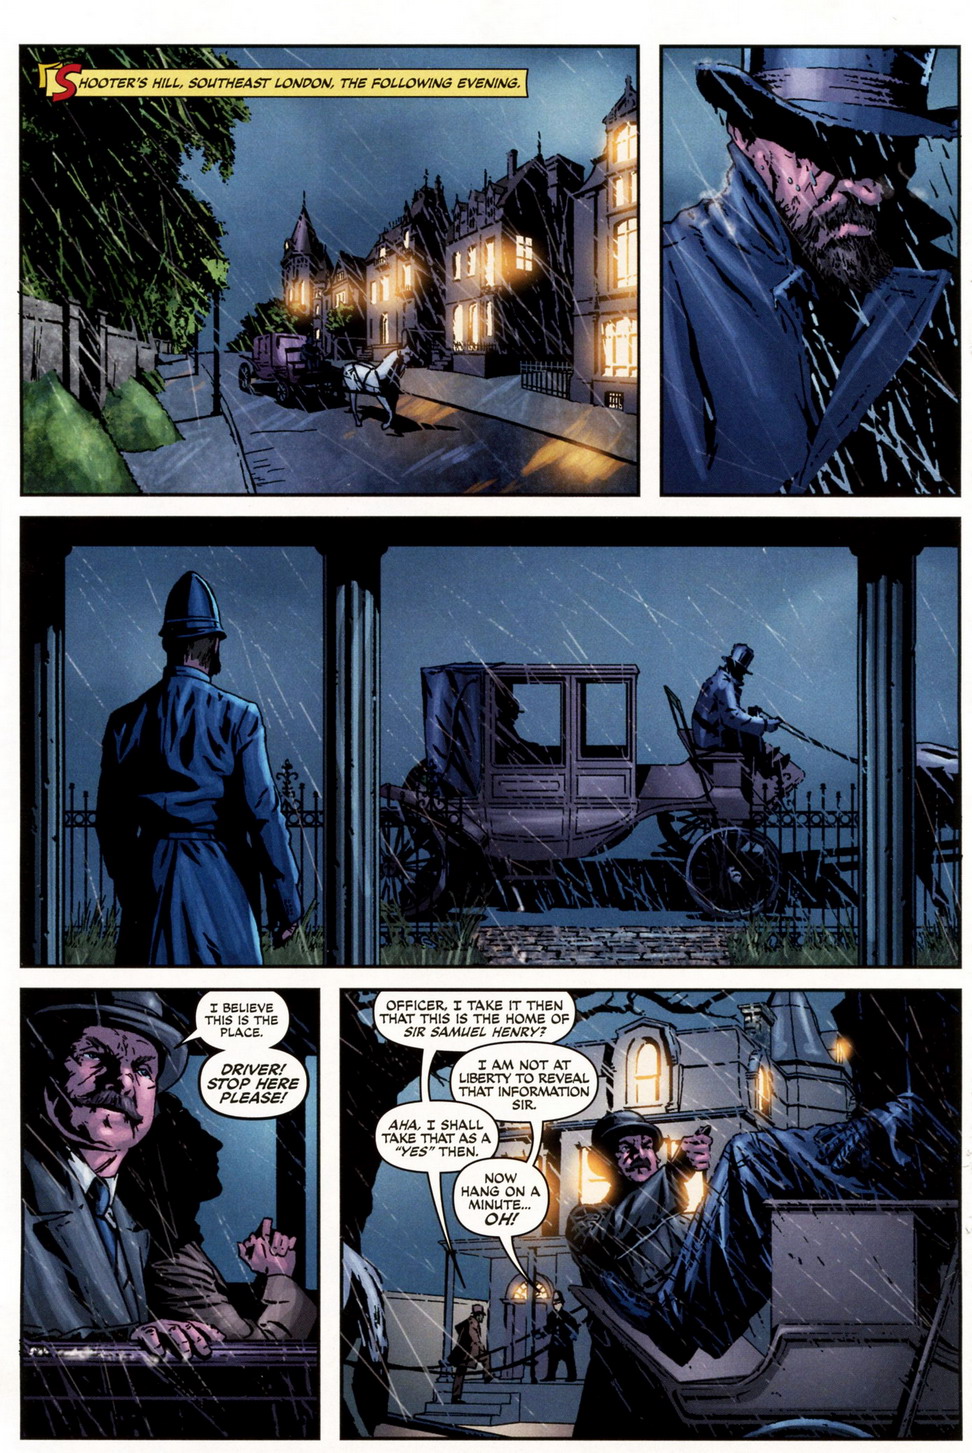 Sherlock Holmes (2009) issue 1 - Page 11